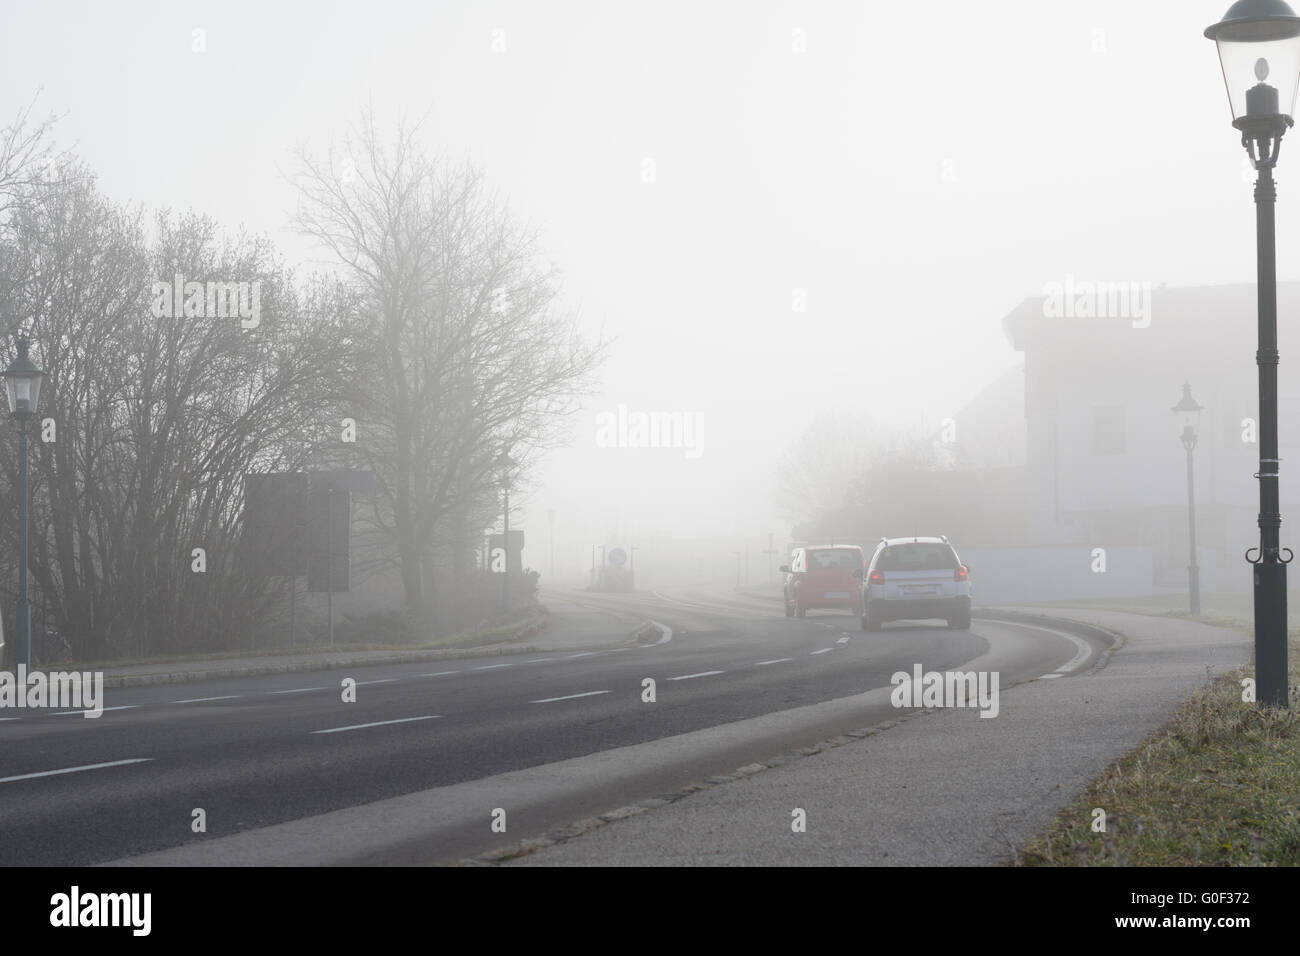 Danger to motorists by poor visibility Stock Photo